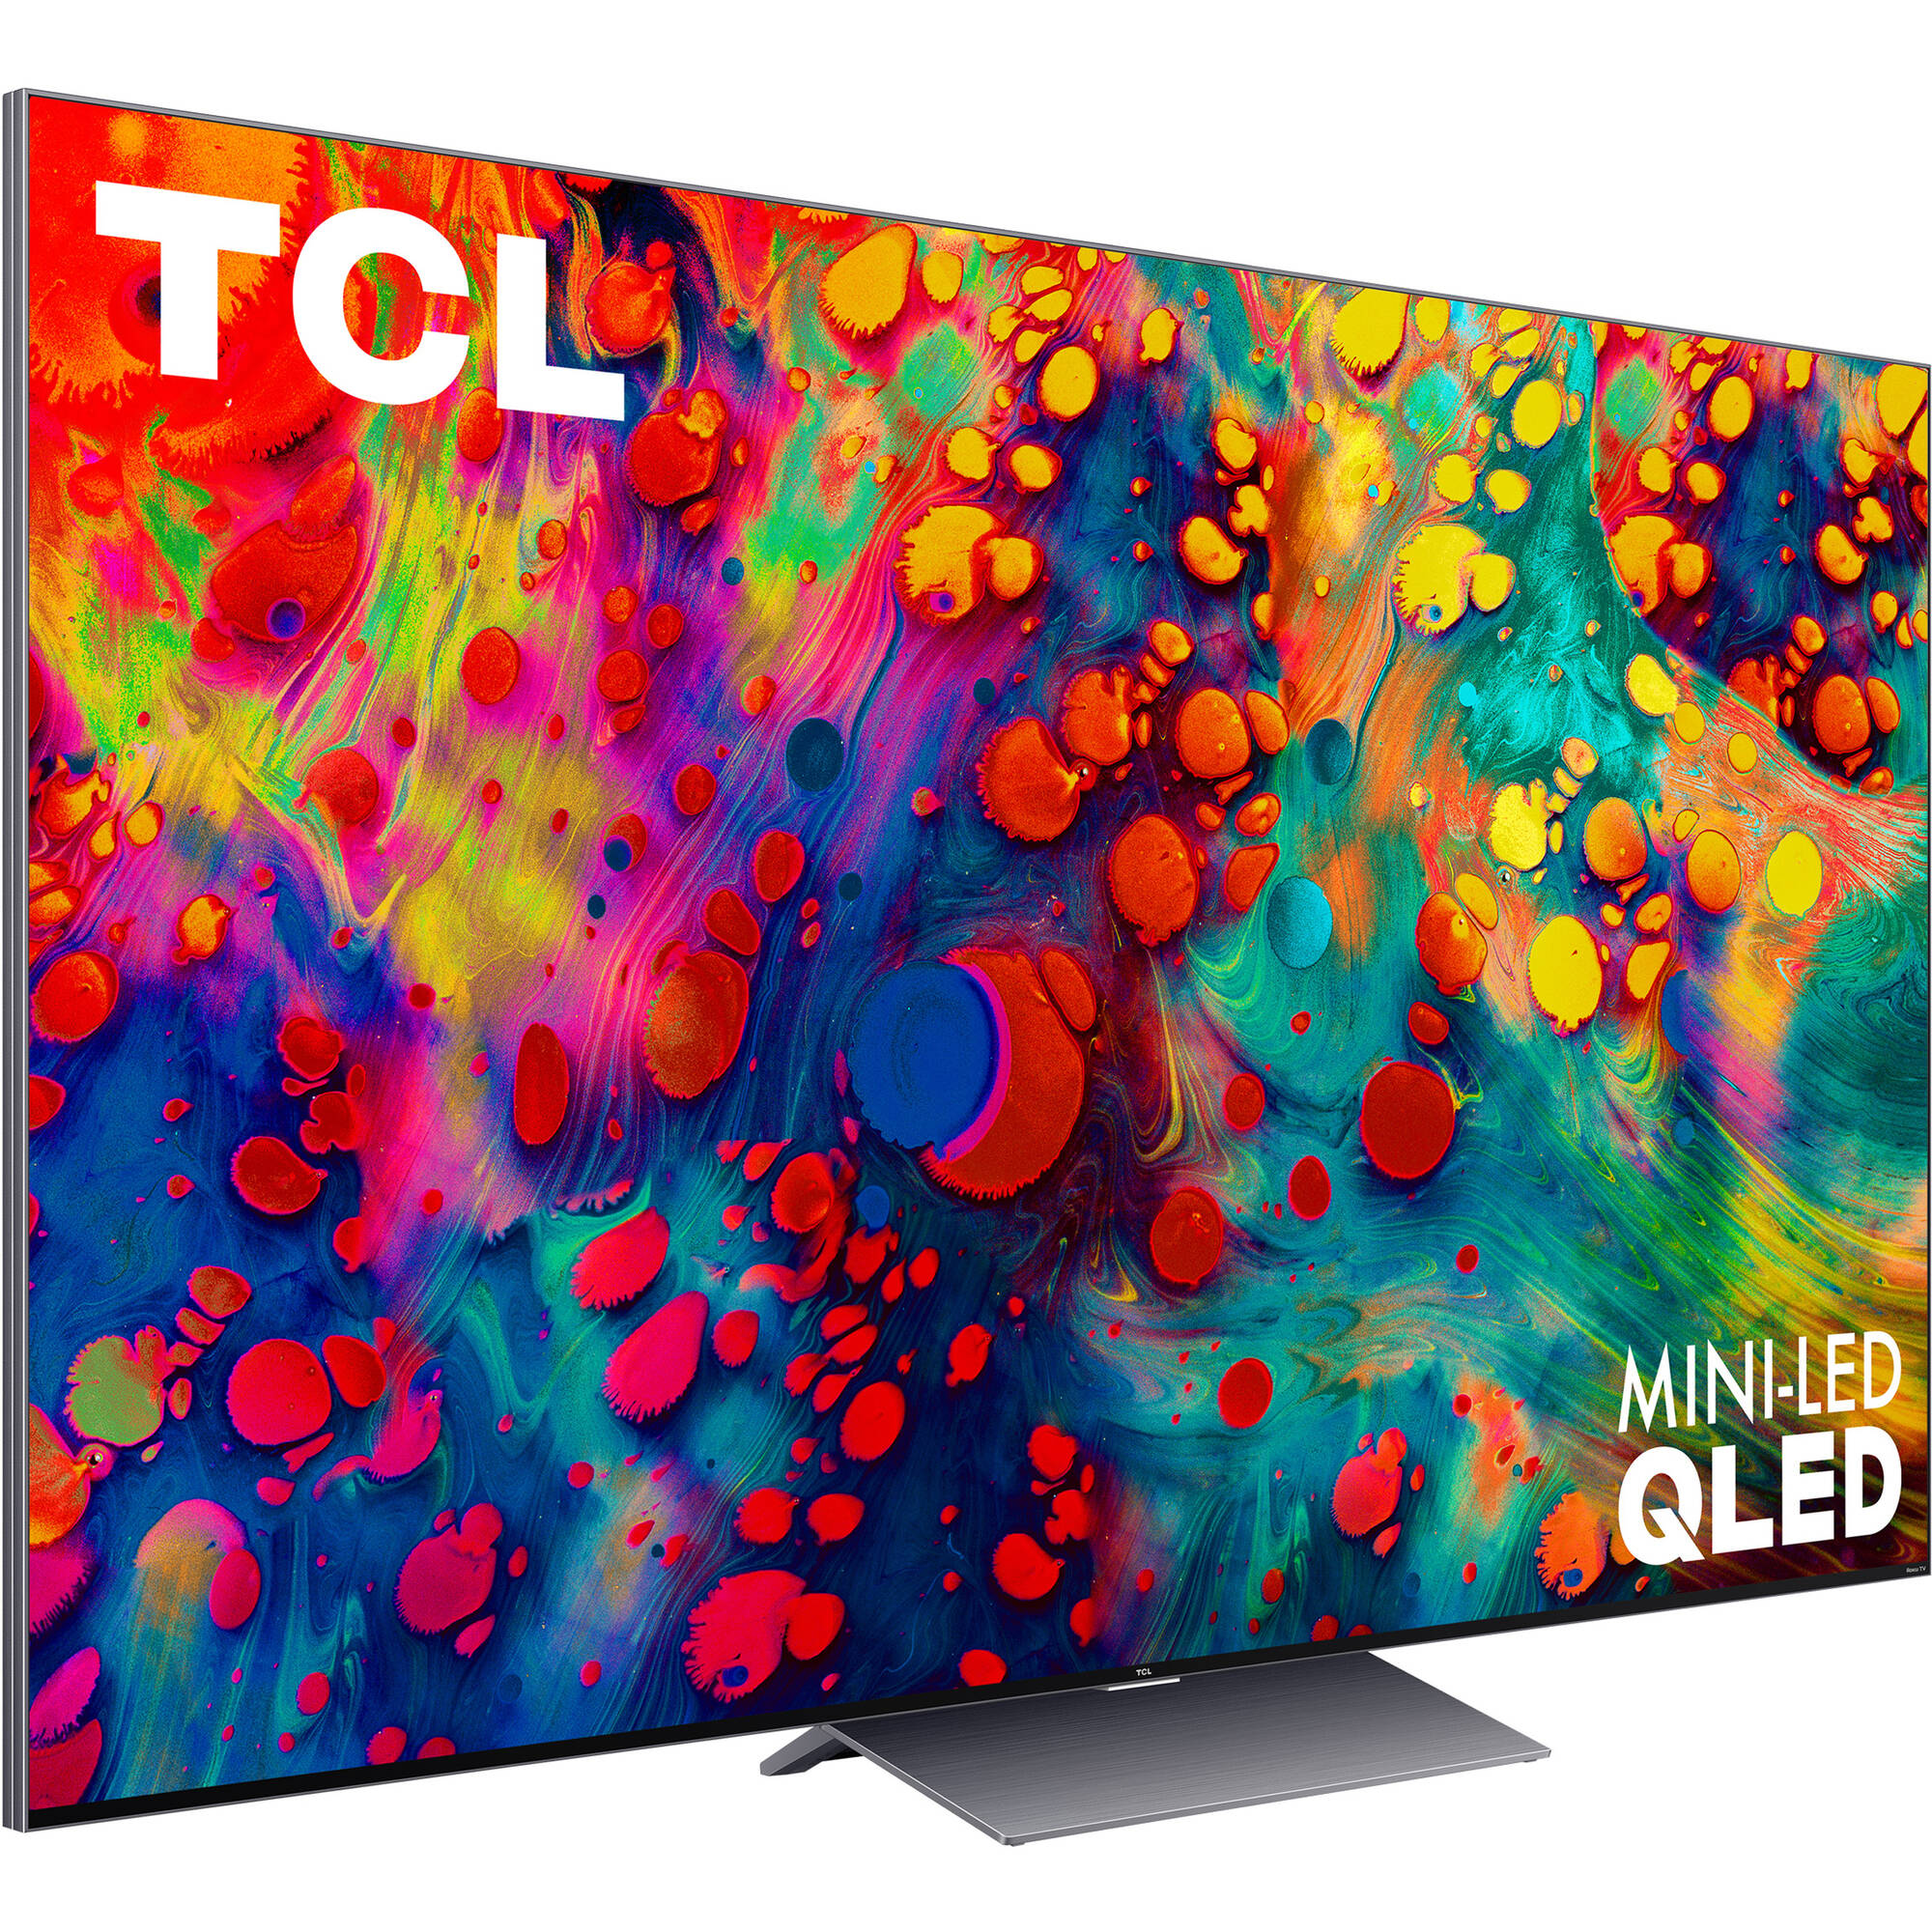 TCL 6-Series R648 75 "Clase HDR 8K UHD Smart Qled TV